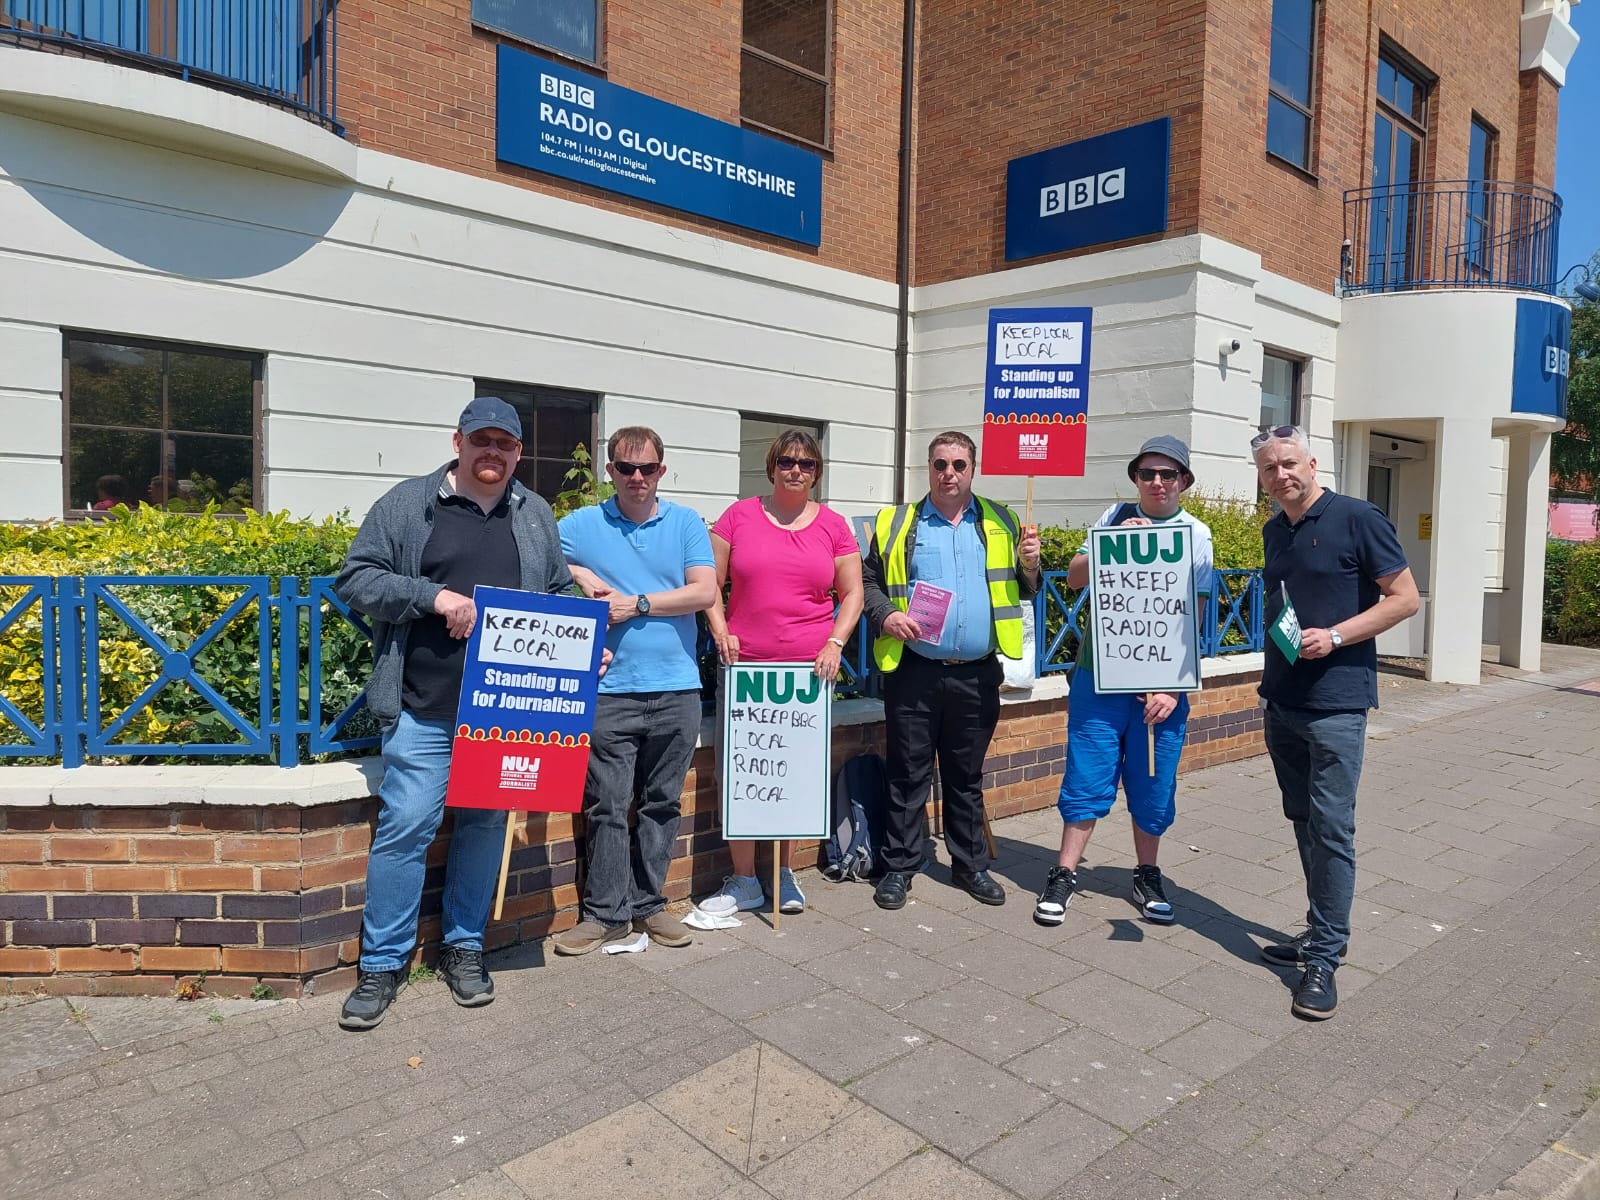 NUJ picket line at BBC Gloucestershire people with placards